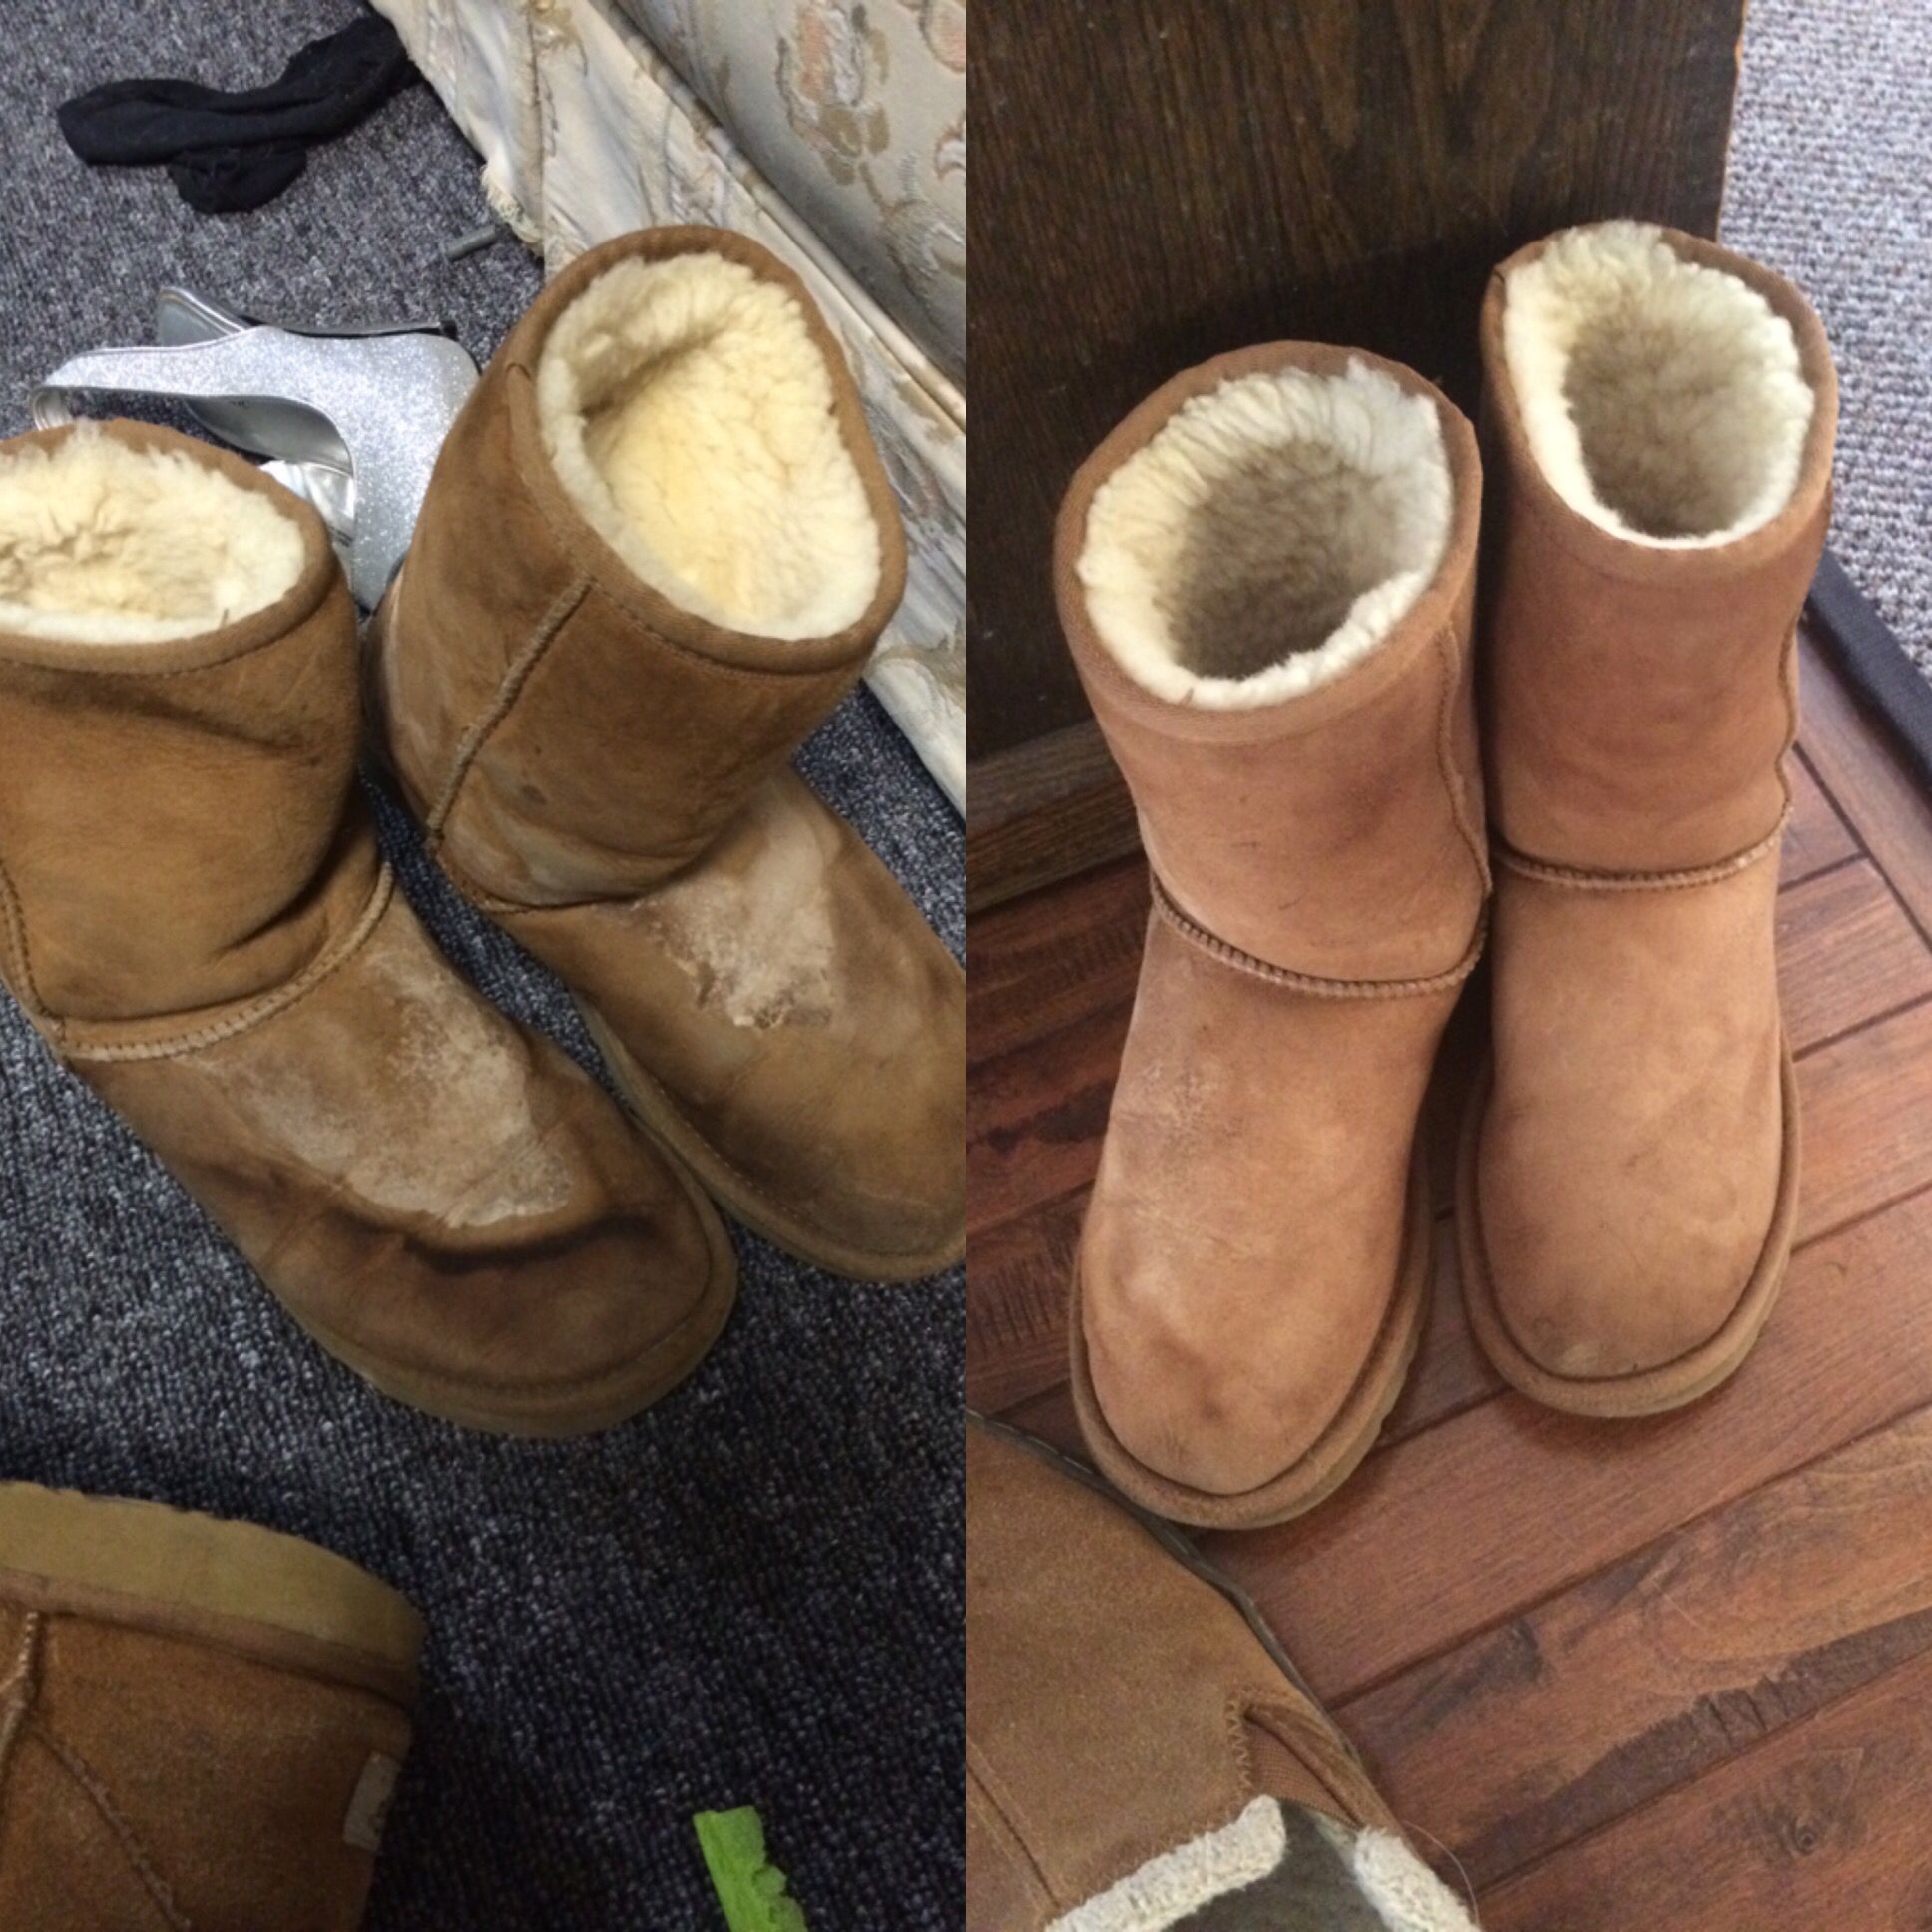 how to clean ugg boots with vinegar